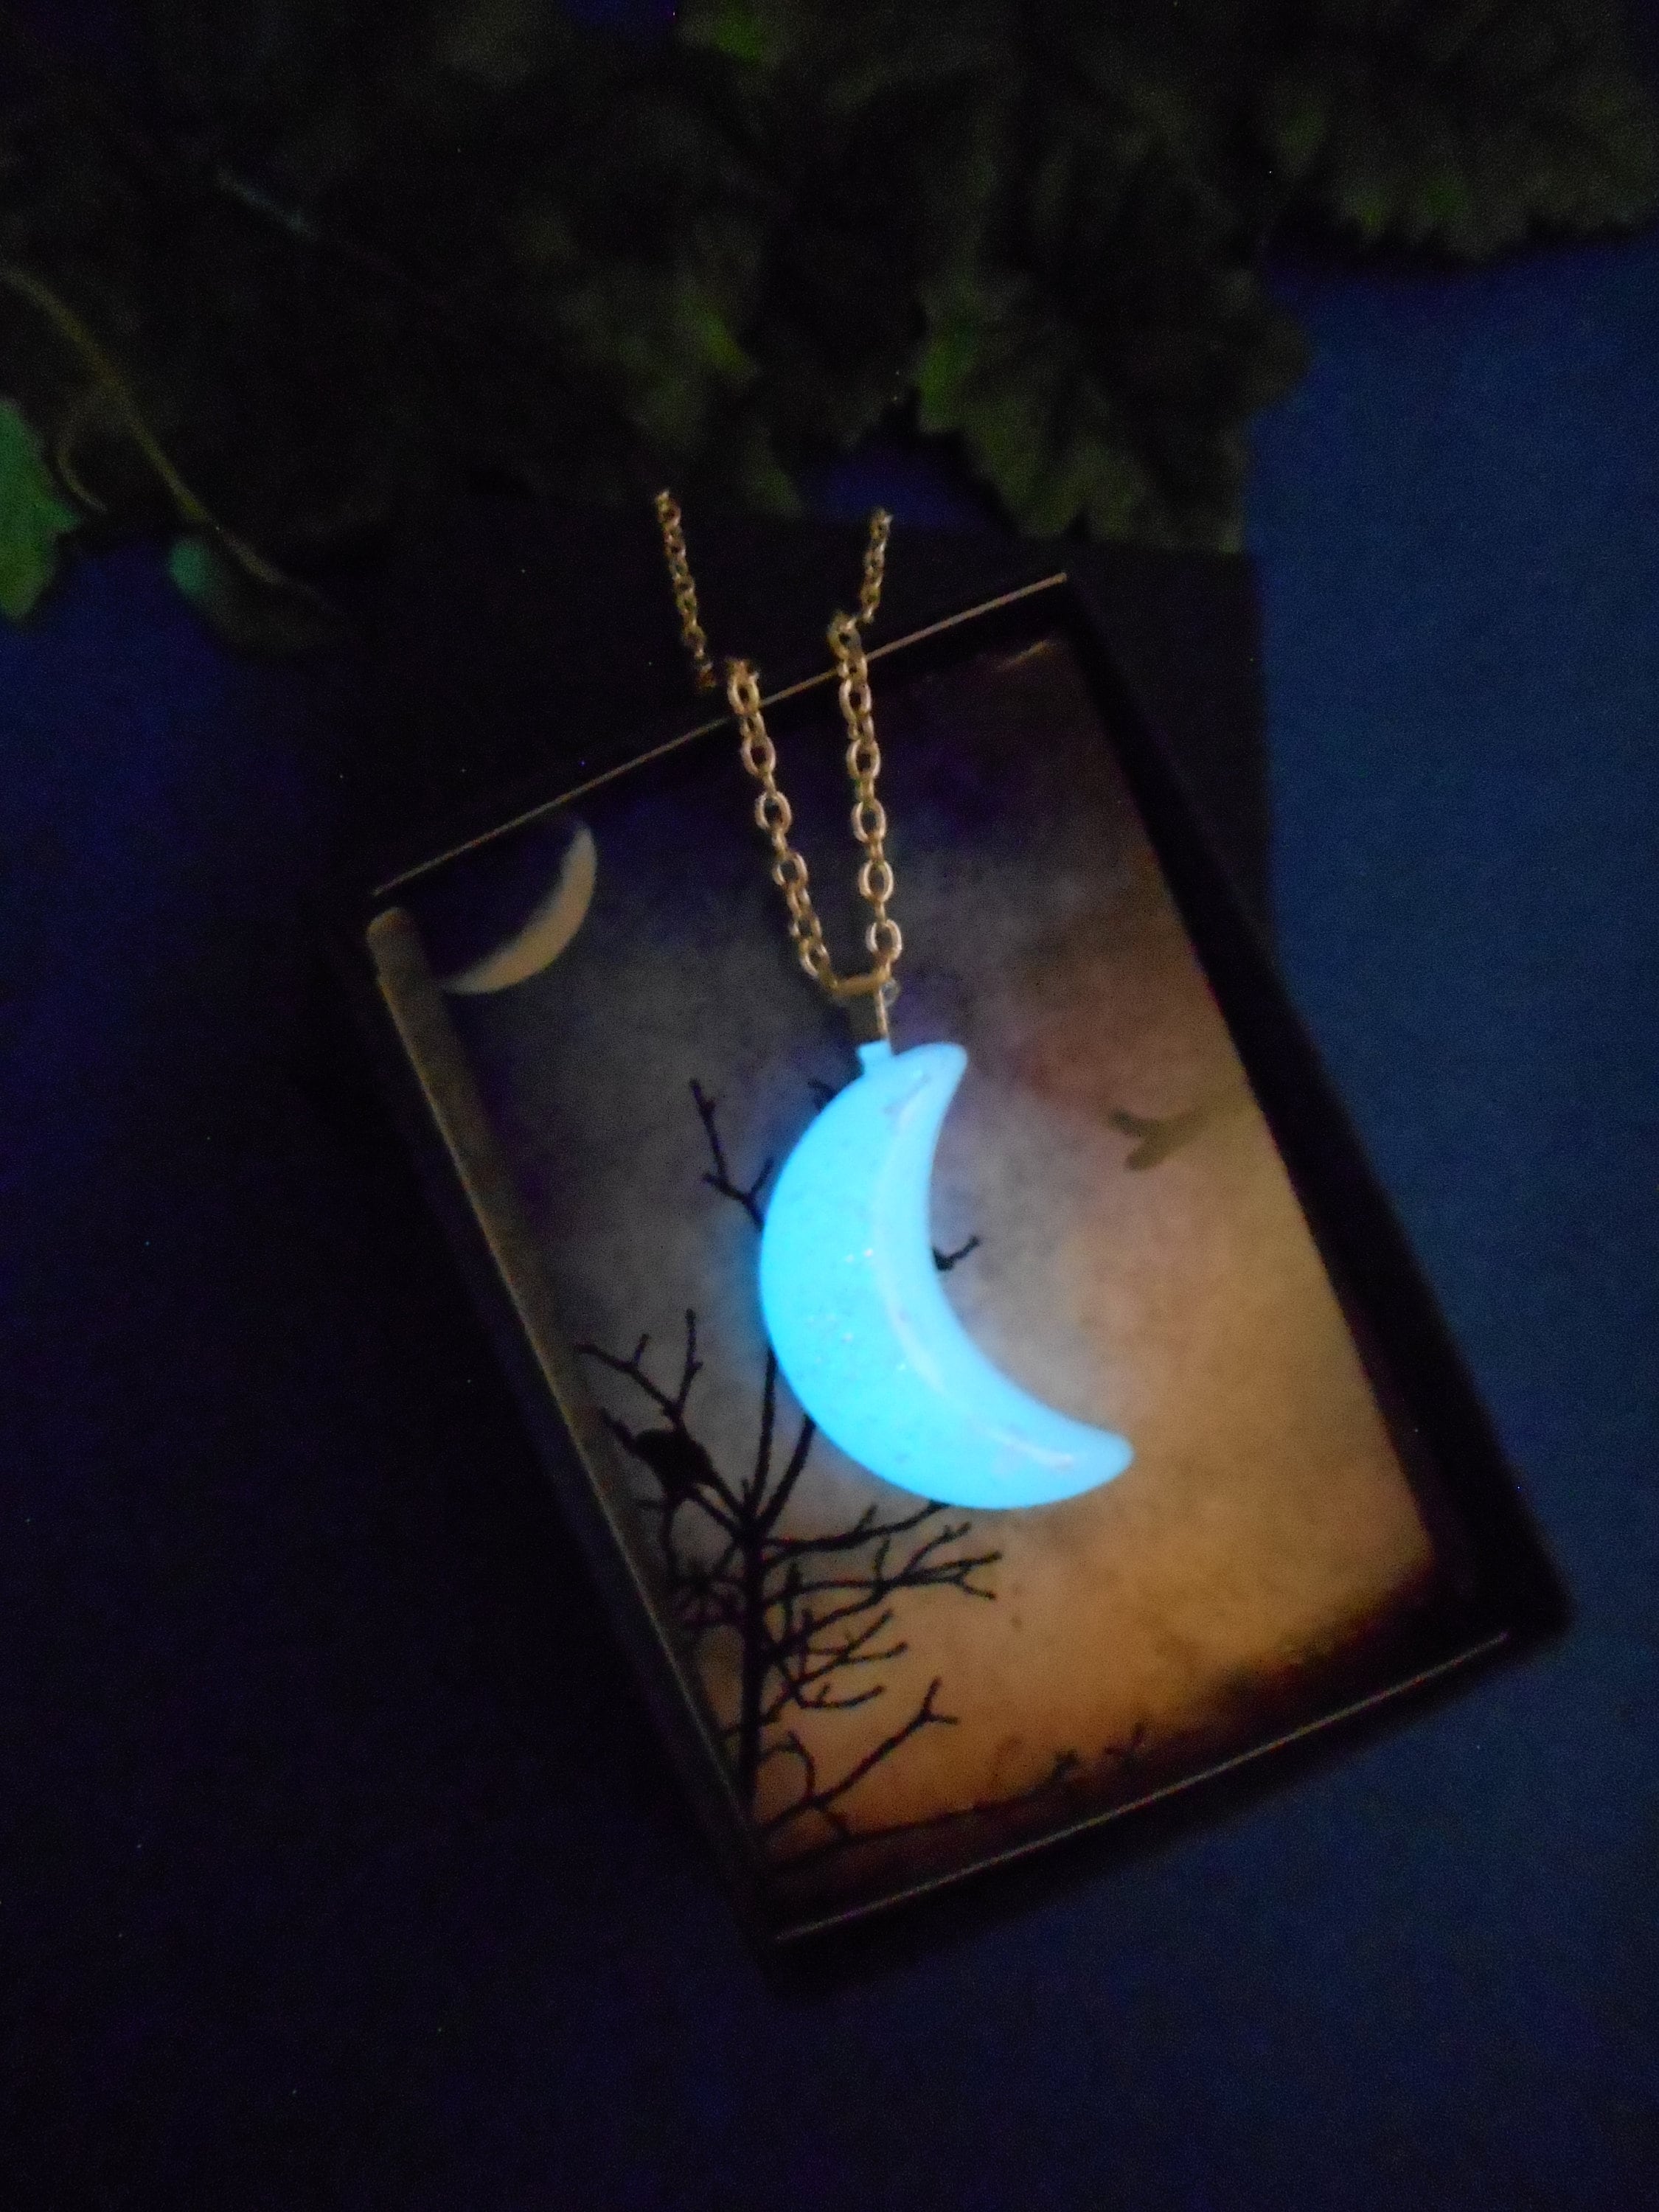 Rckcu Glow in The Dark Silver Crescent Moon and Orb Necklace - Glowing Blue  Moon Charm - Magical Fantasy Fairy Glowing Necklace - Glow Jewelry